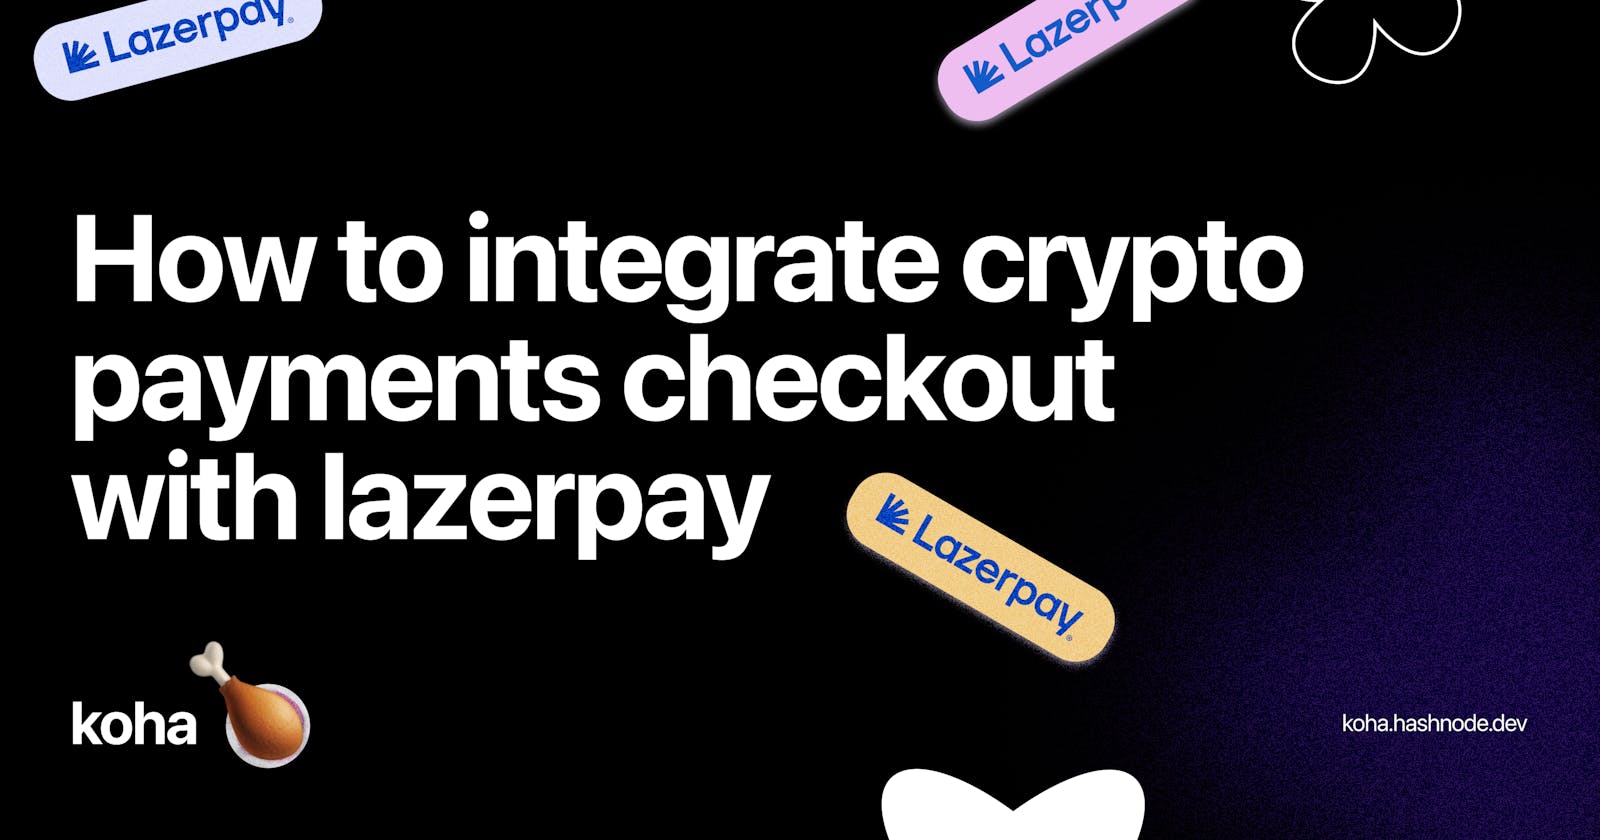 How to Integrate Pay with Crypto Payment Checkout with Lazerpay